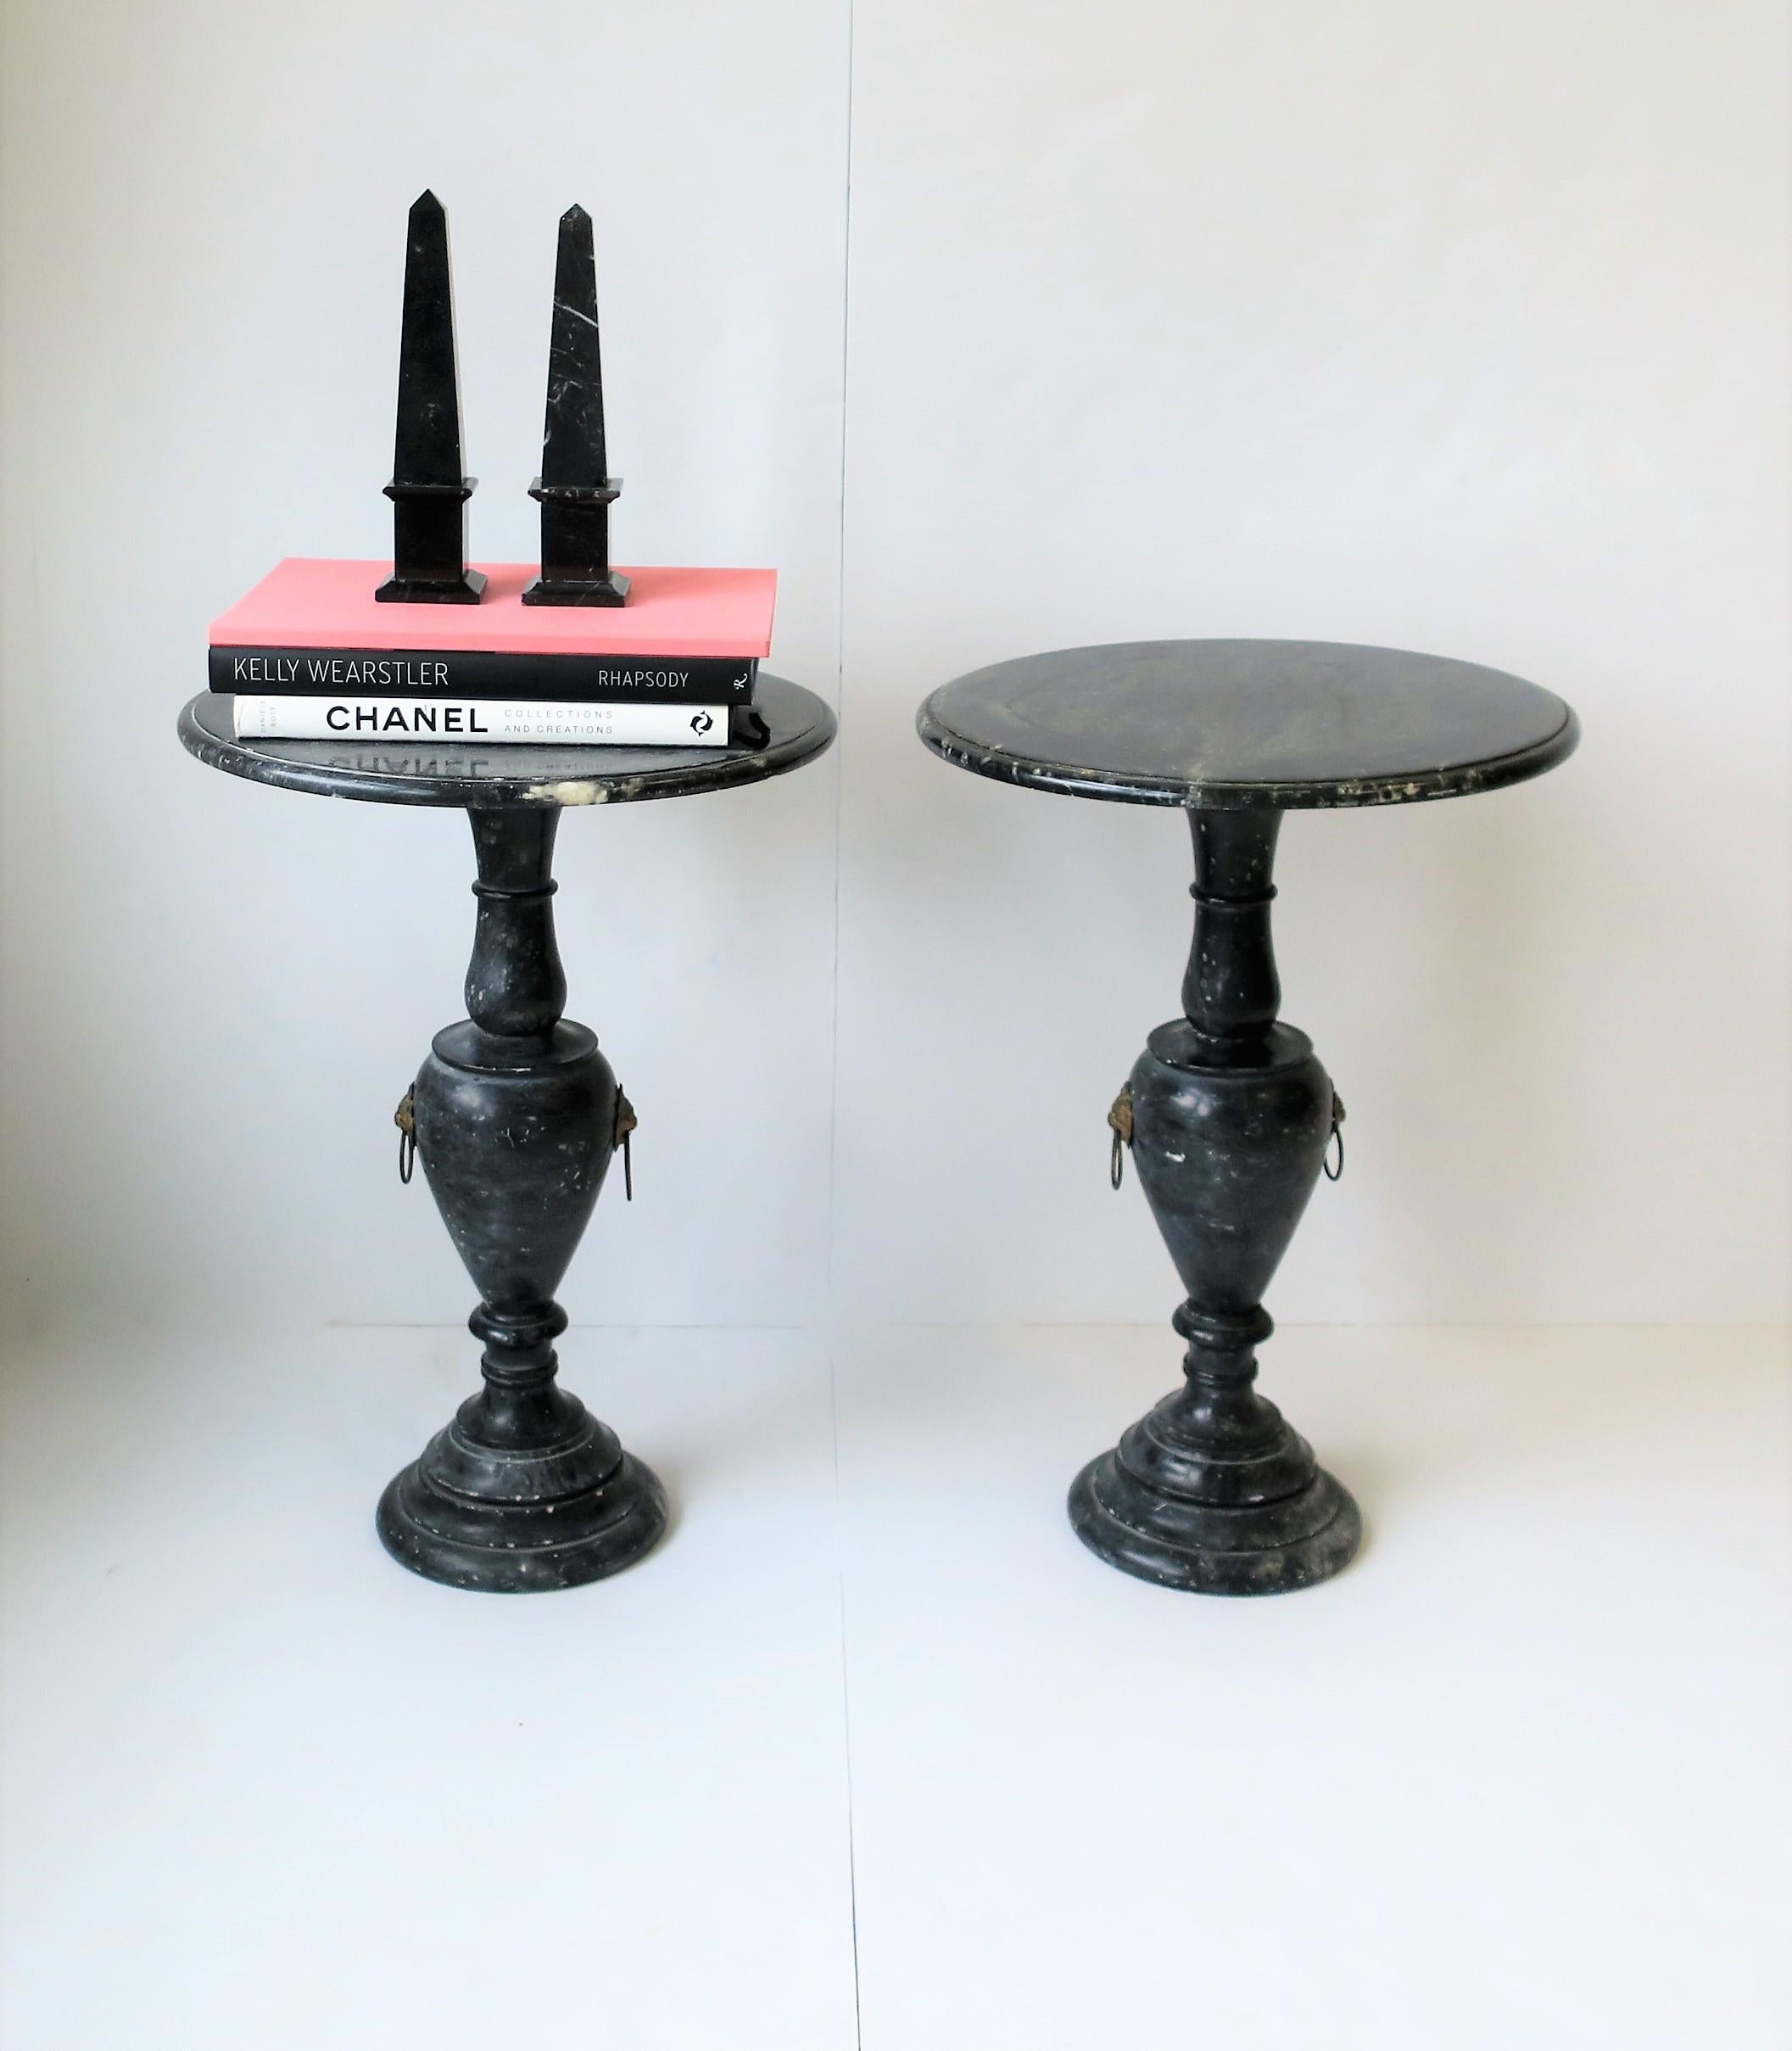 A beautiful and substantial pair of Italian Regency style black and white marble round gueridon side or end tables with decorative brass lion-head detail, circa Mid-20th Century, Italy. Tables are solid, beautifully carved and polished smooth with